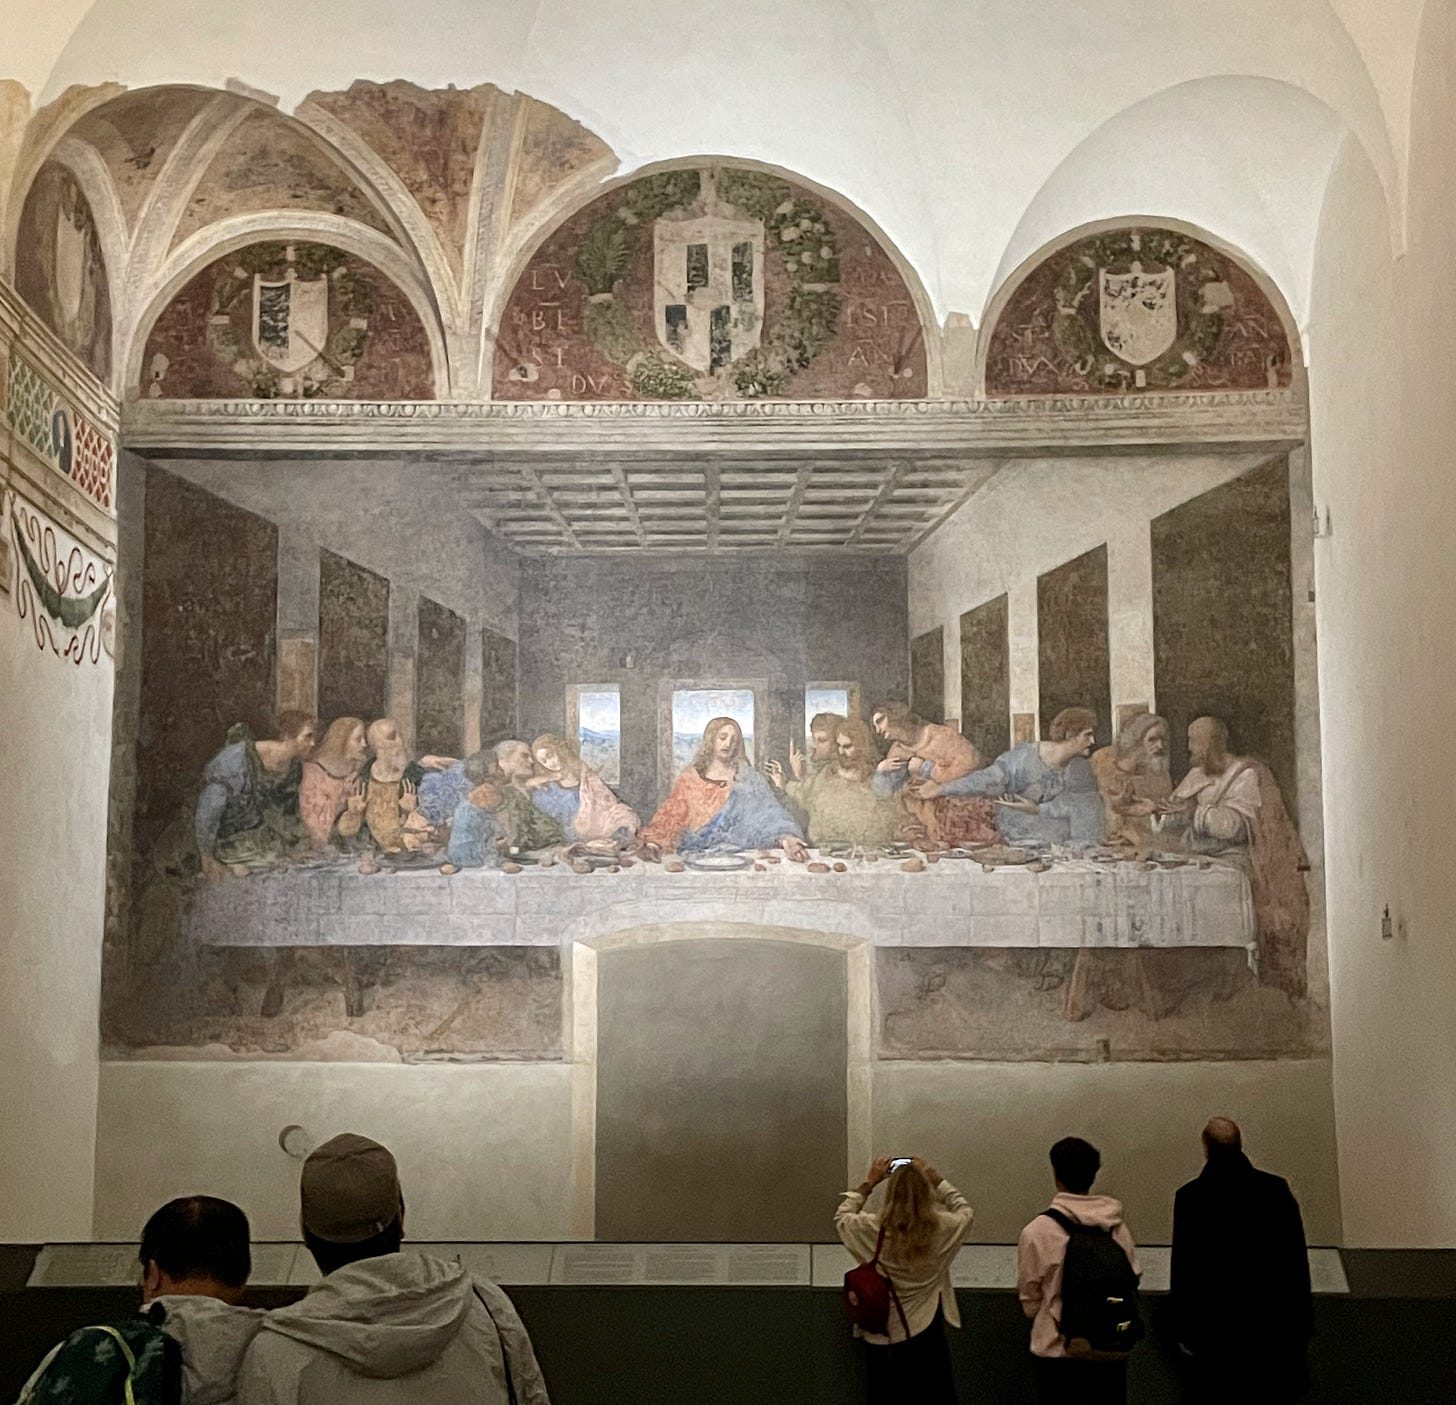 View of Leonardo Da Vinci's "The Last Supper" from mid distance showing the large size of the mural